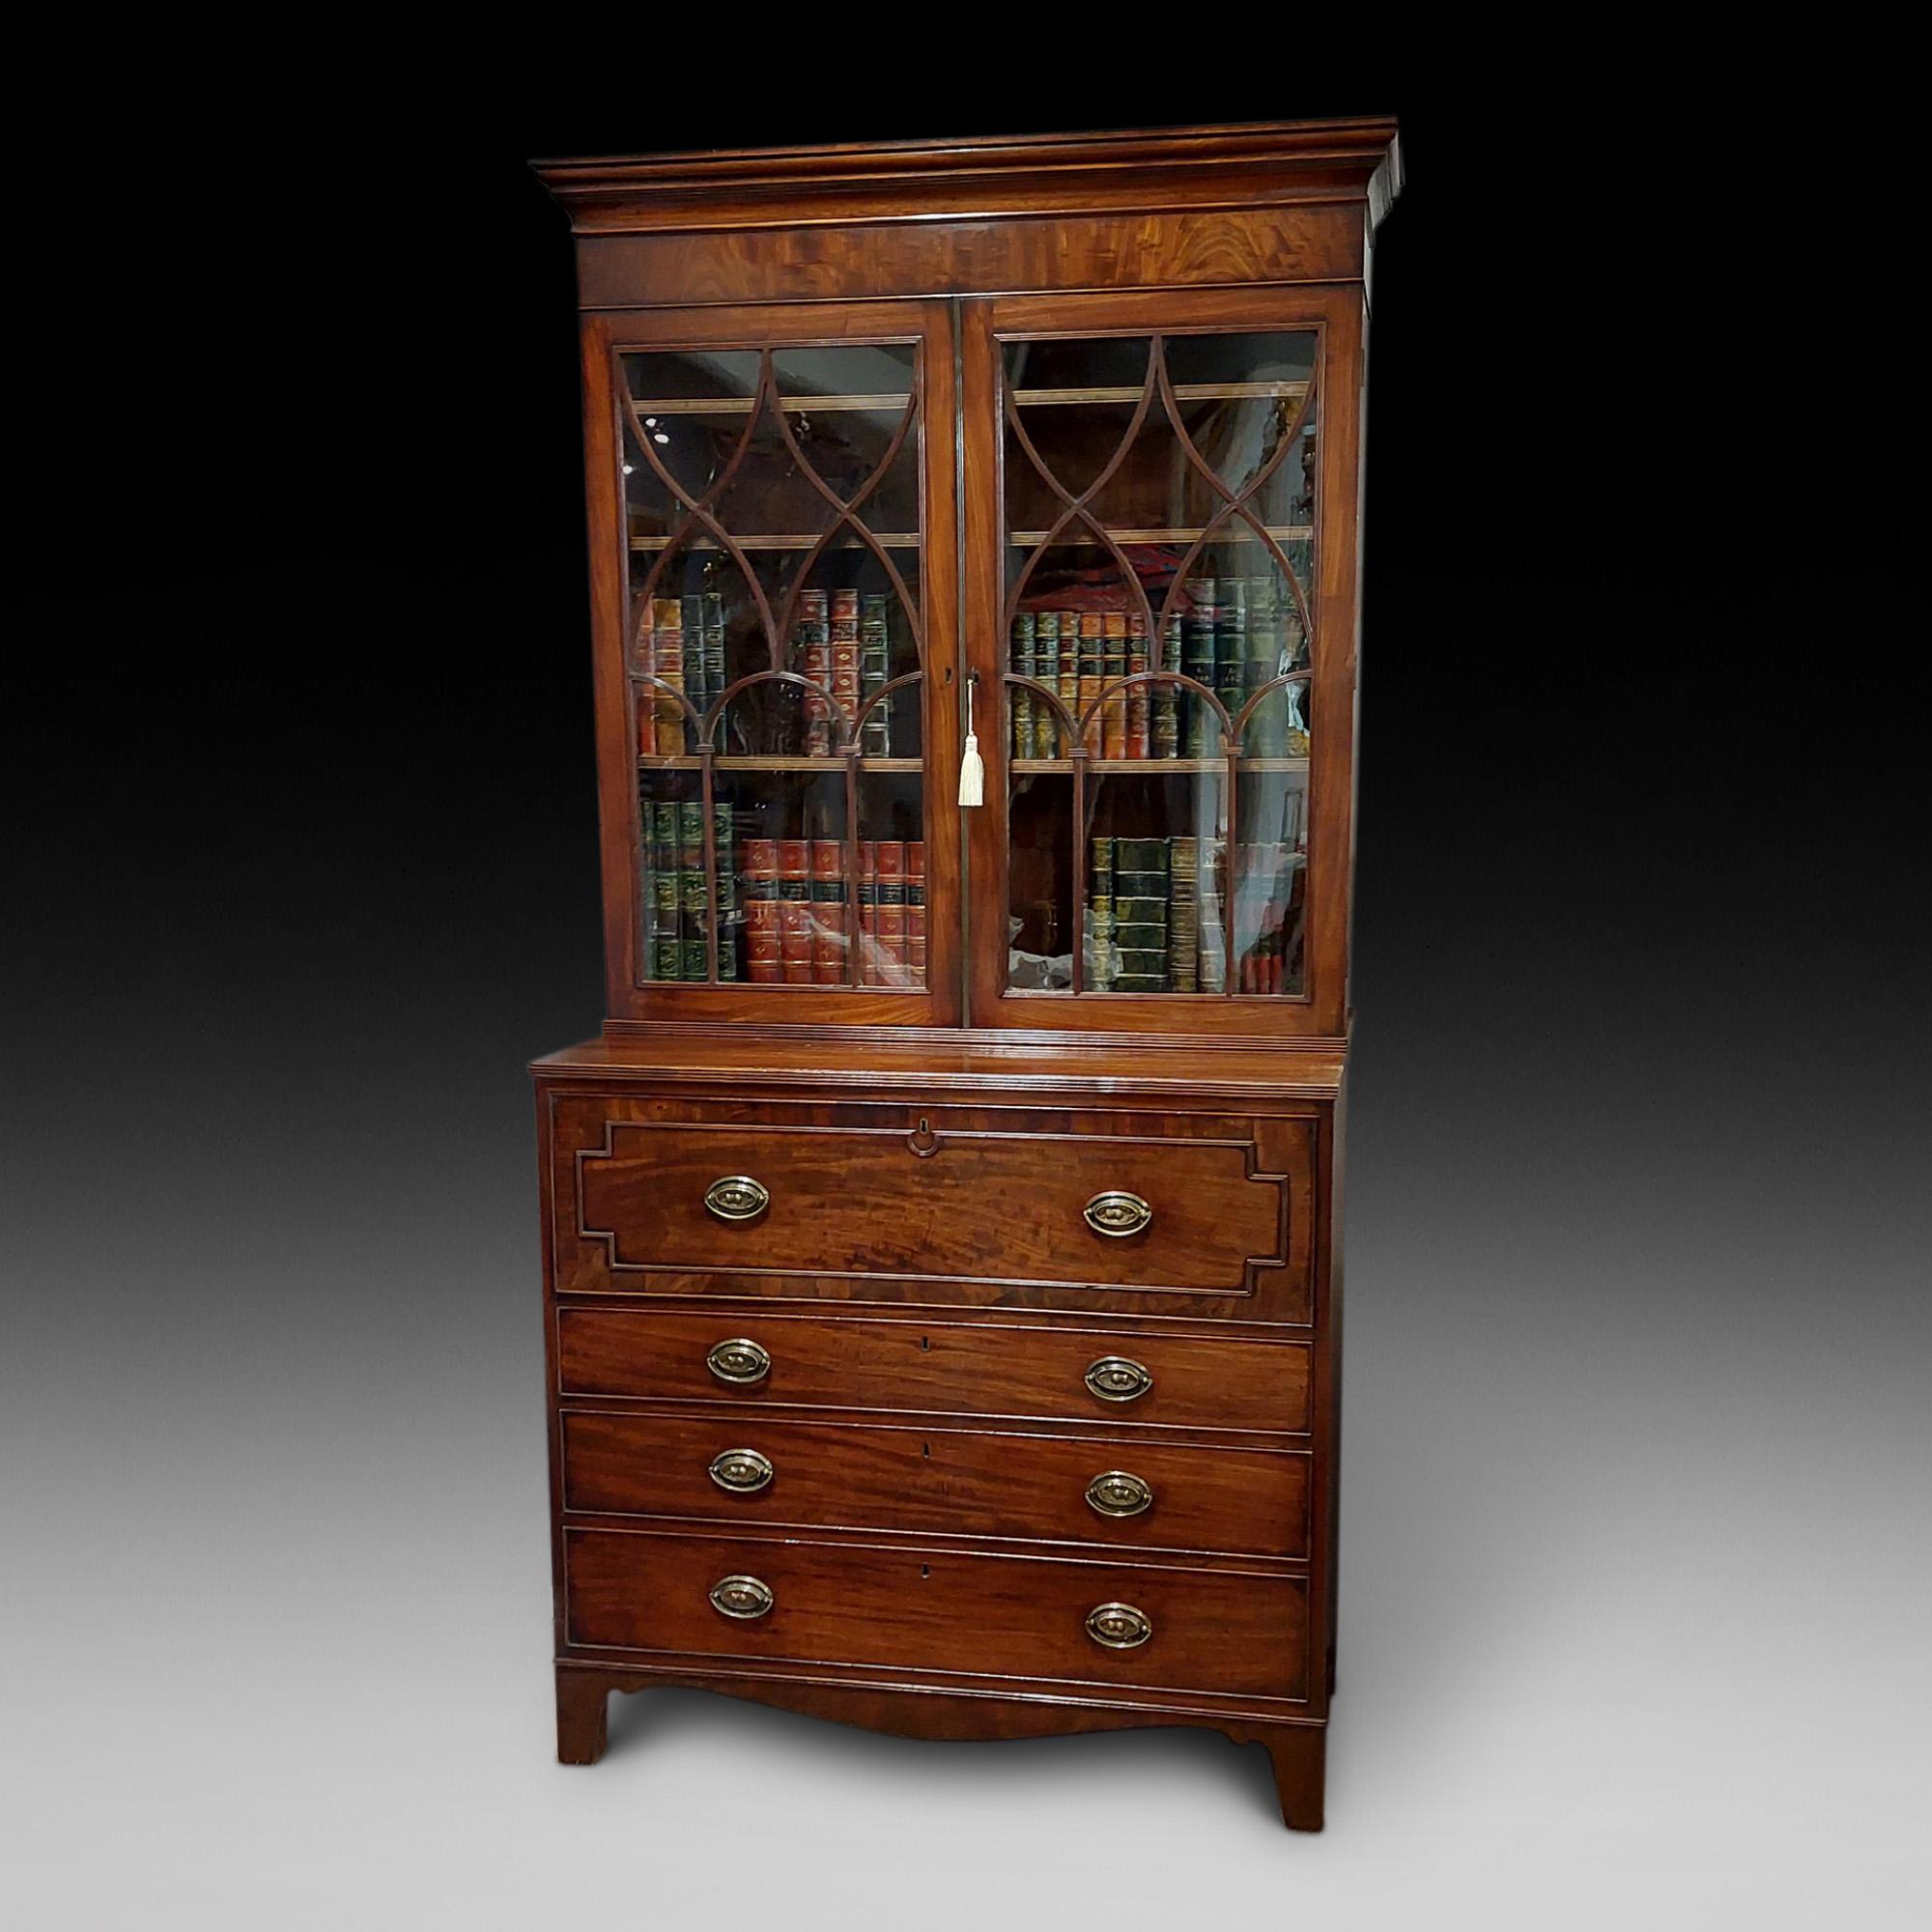 George IV mahogany secretaire bookcase, the upper section with a pair of eliptical glazed doors, the base with satinwood lined serectair drawer above a further three long drawers on shaped bracket feet - 43